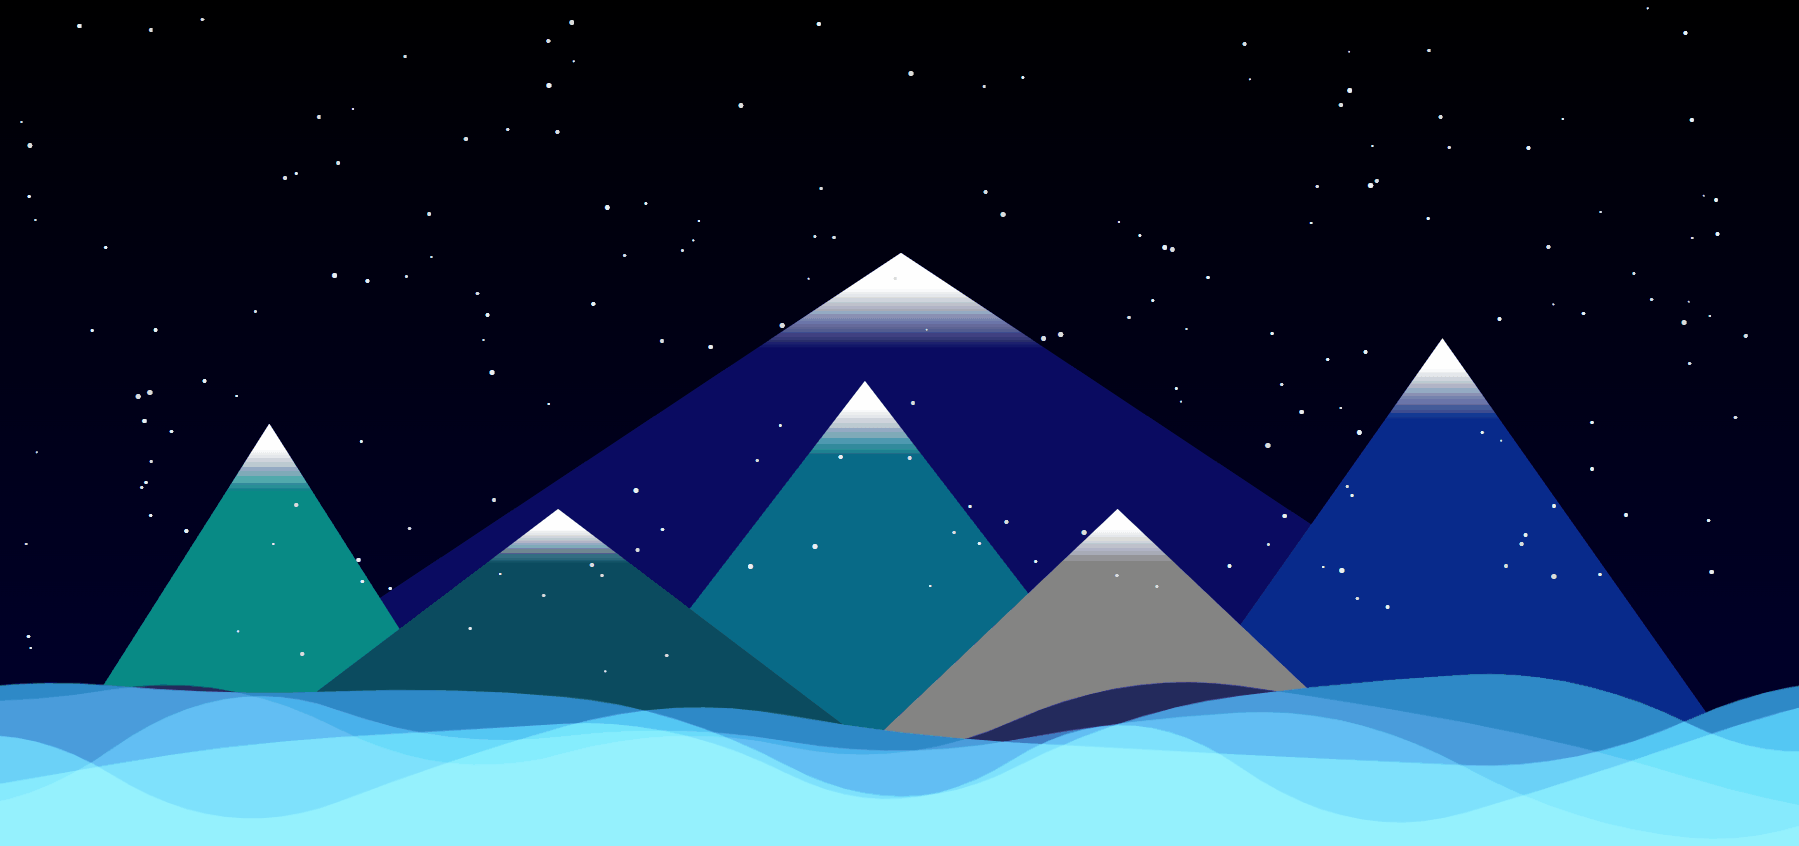 Preview - Scene Wave and Snow Mountains